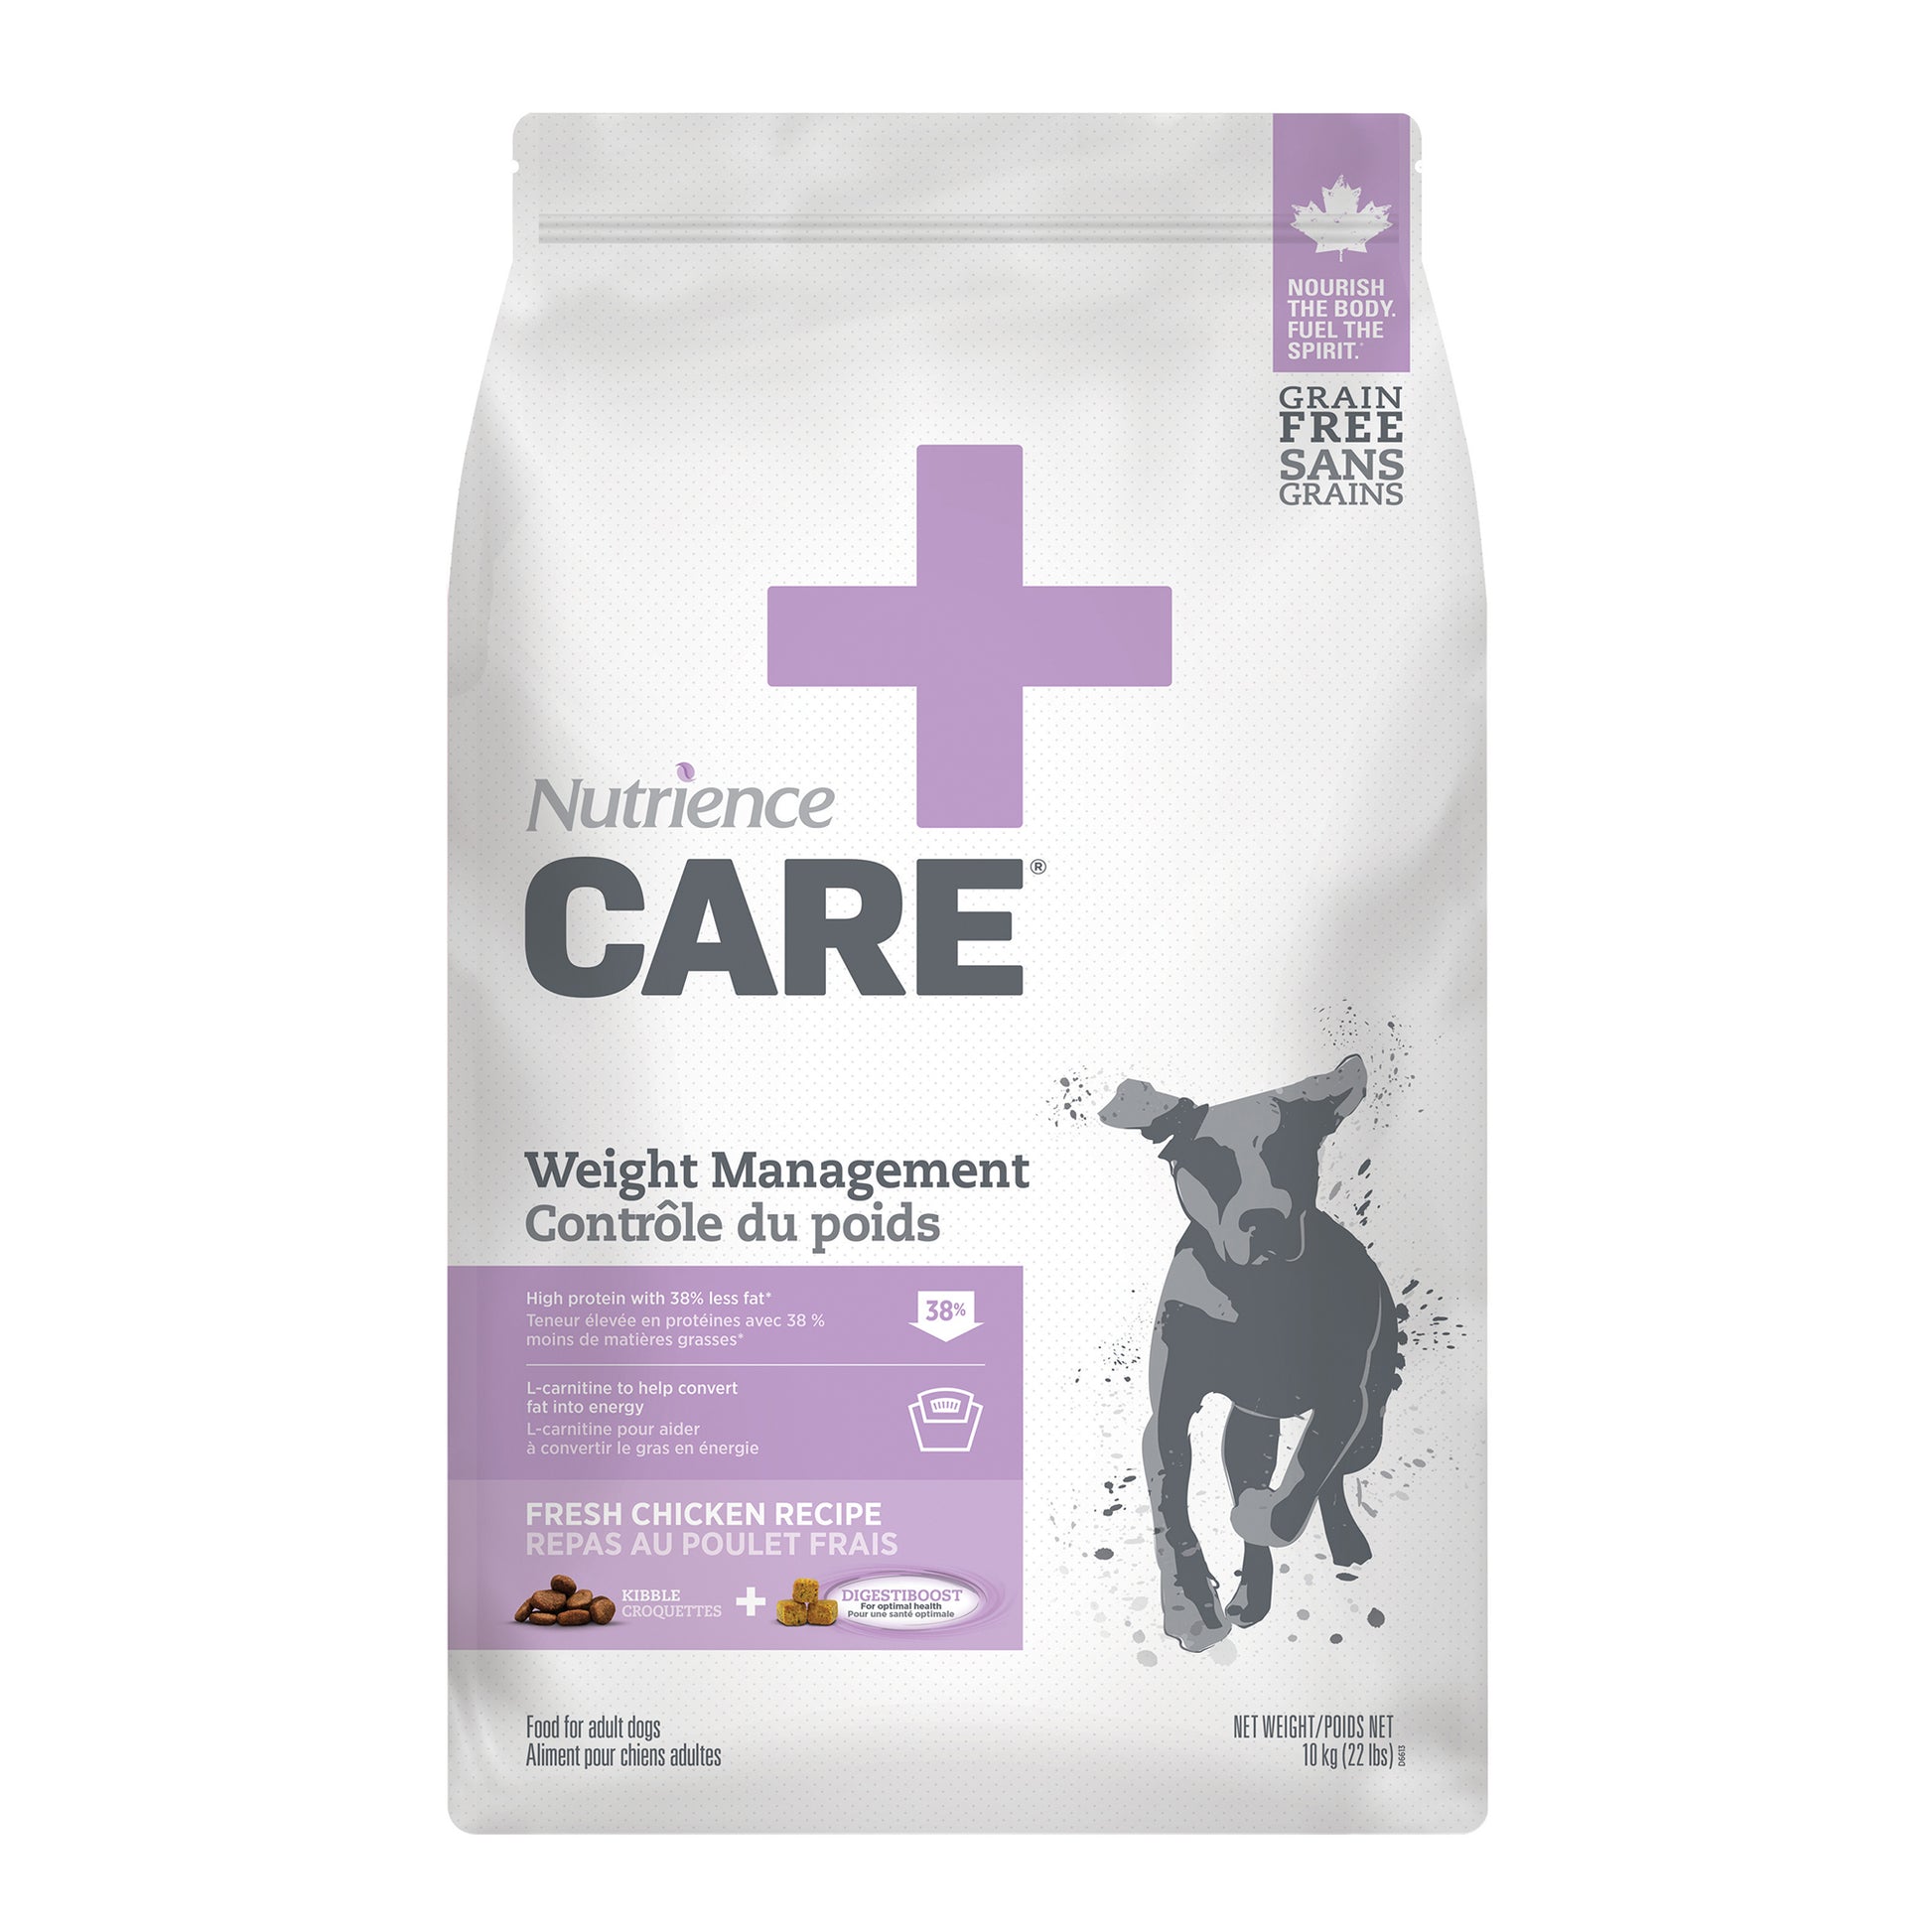 Nutrience Care Dog Food Weight Management  Dog Food  | PetMax Canada